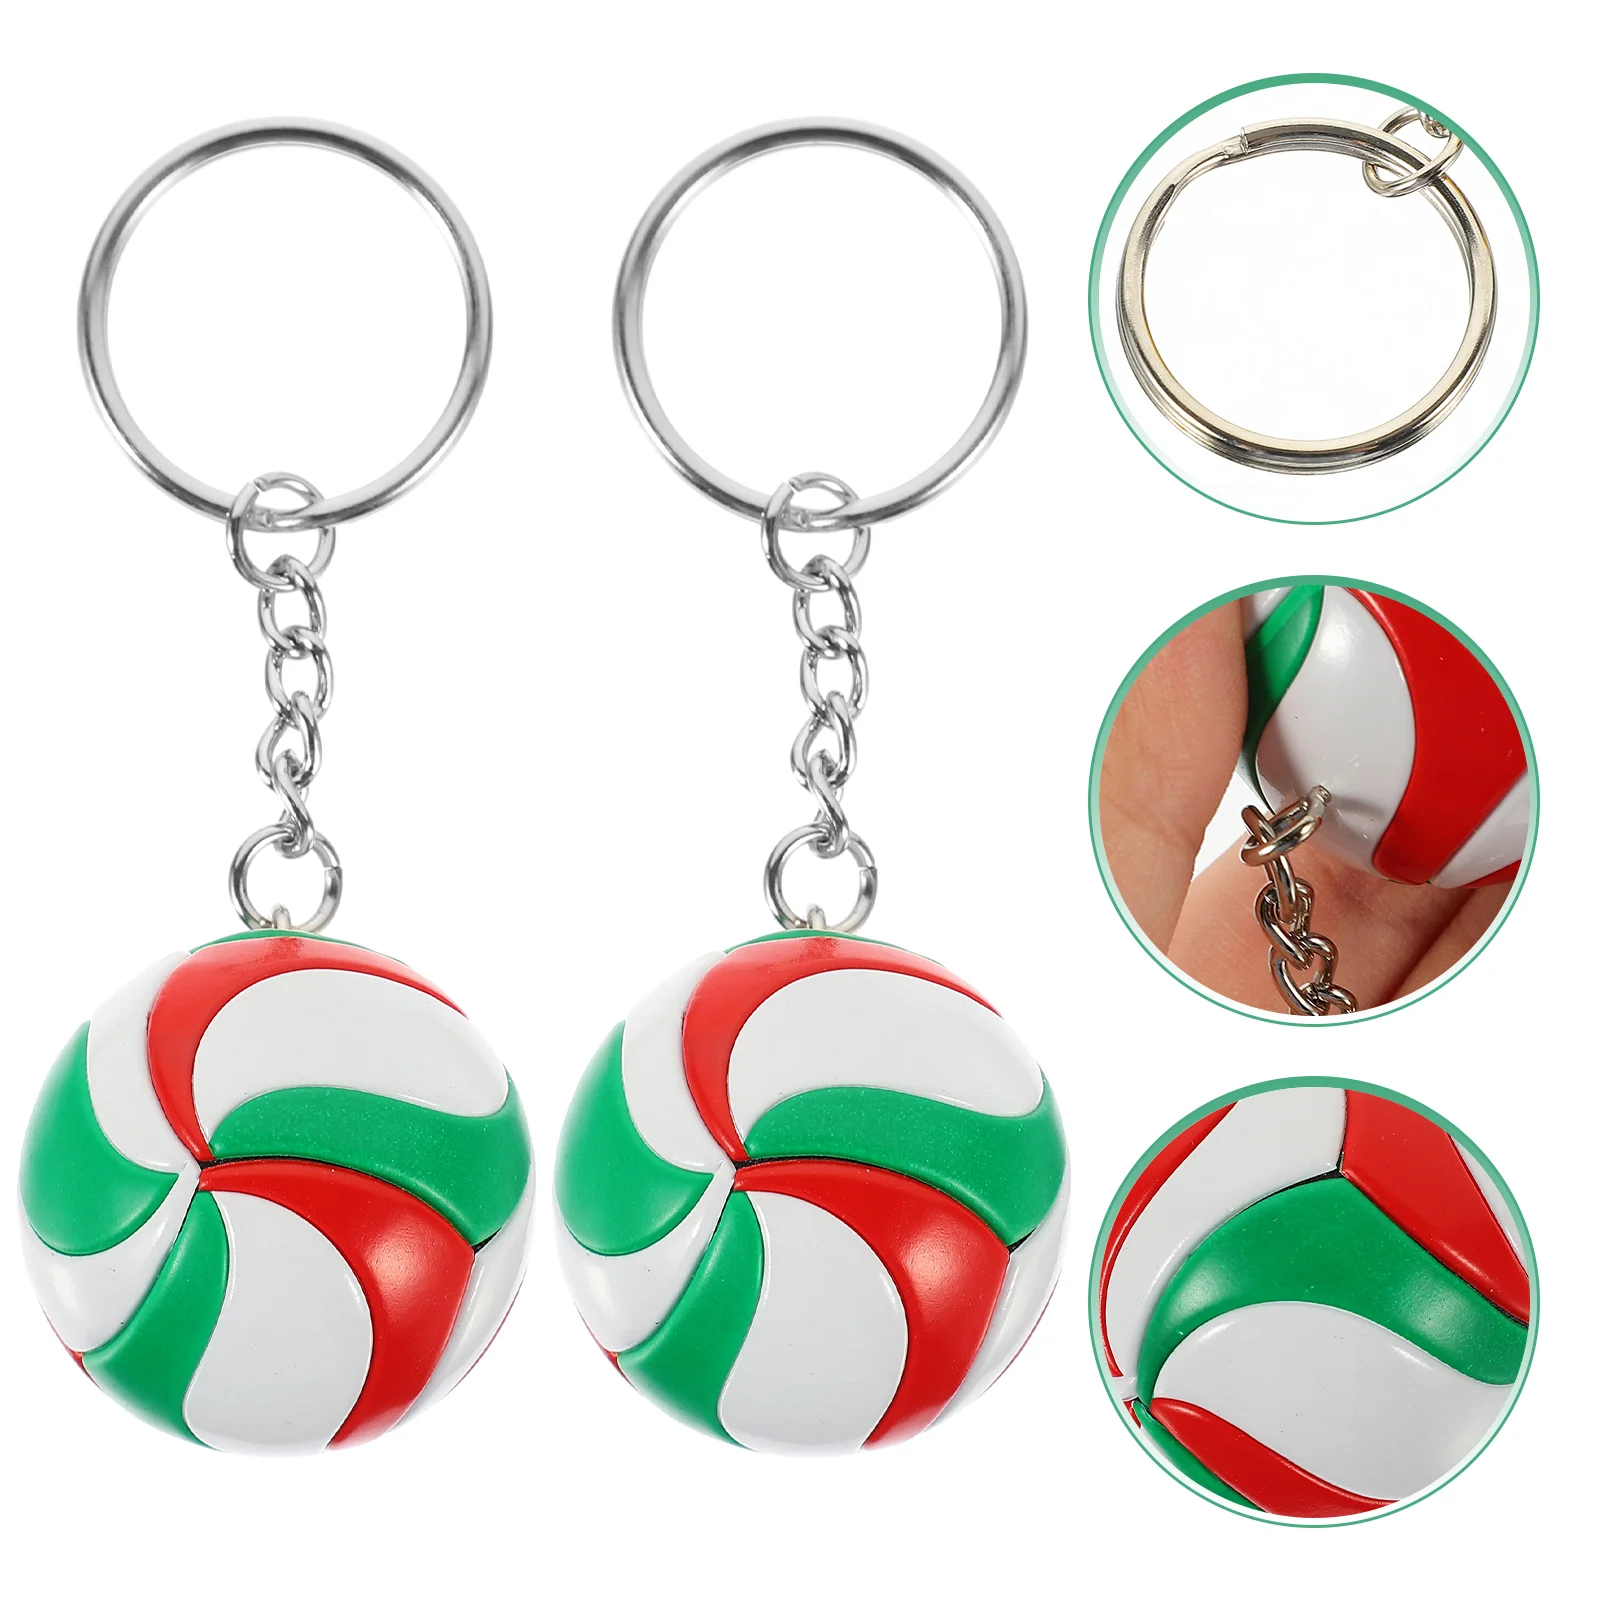 

2 Pcs Volleyball Model Toy Bag Accessory Compact Pendant Keychains Car Keys Exquisite Hanging Rings Children